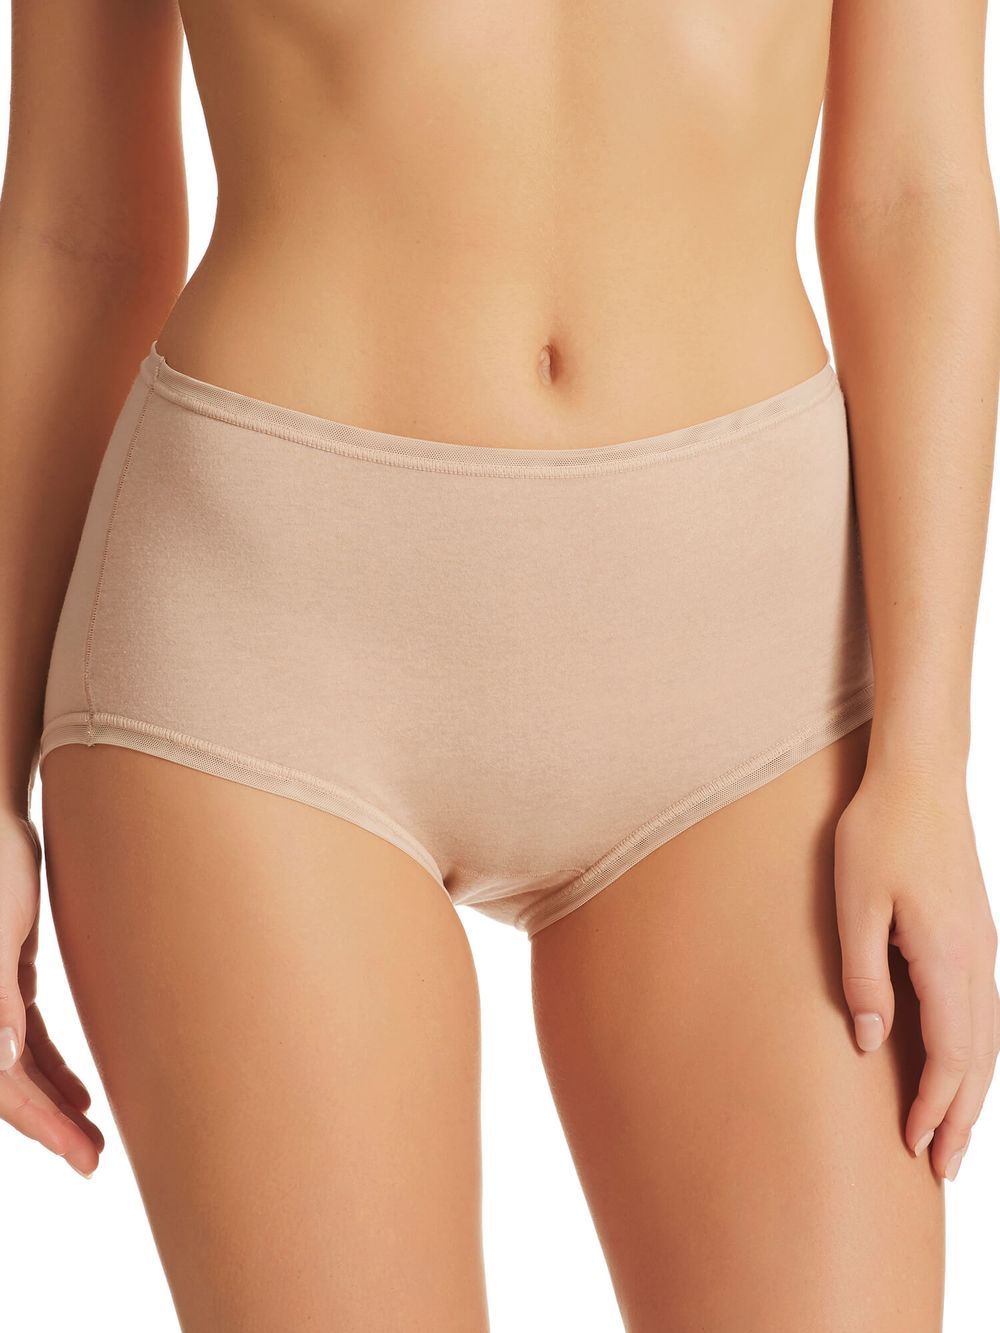 Kayser Pure Cotton Full Brief 13RFB34 - Briefs Skin / 10 / S  Available at Illusions Lingerie